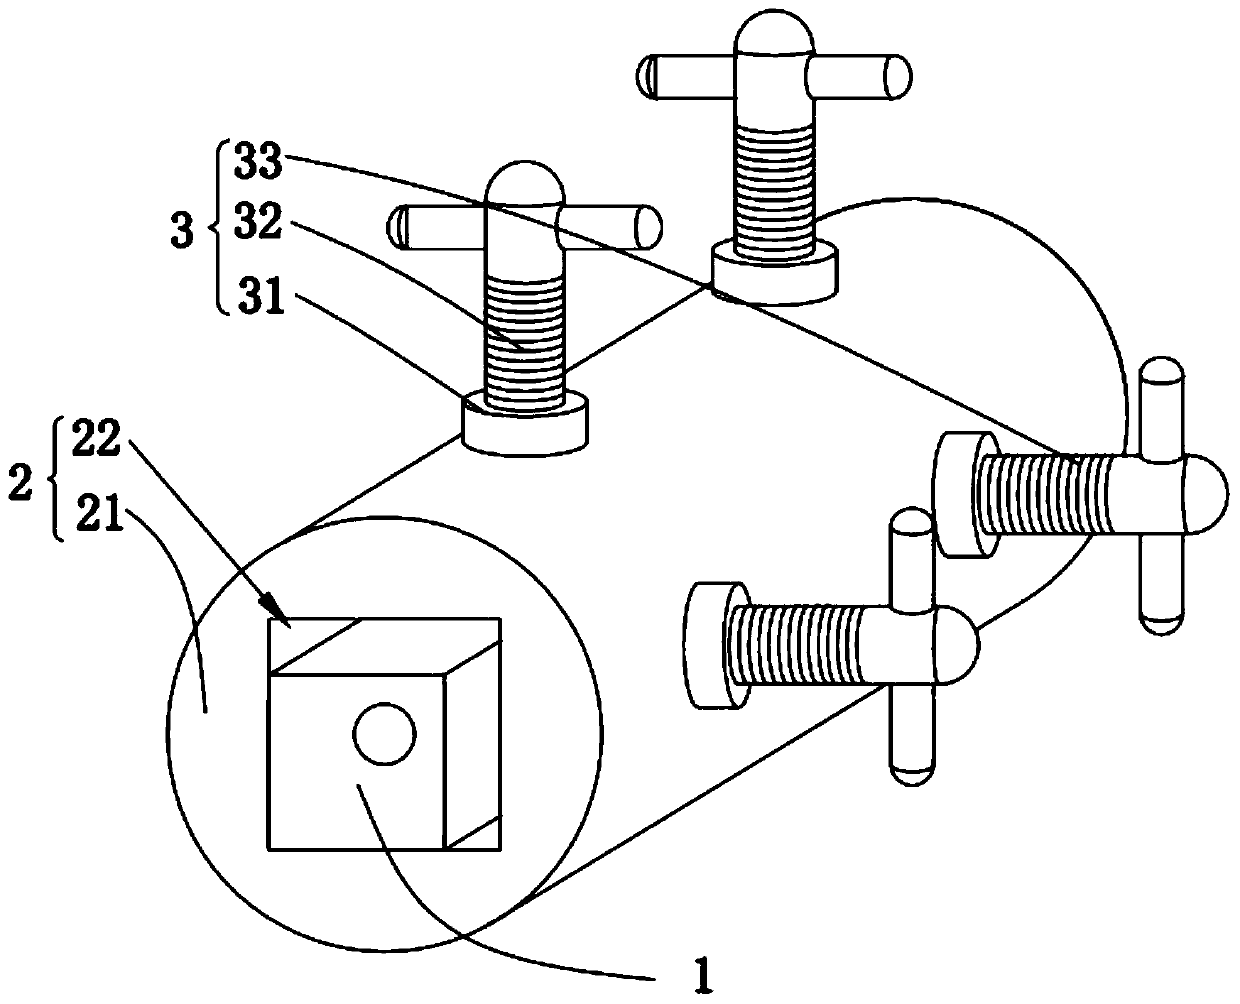 A Lathe Positioning Device for Eccentric Cylindrical Workpieces